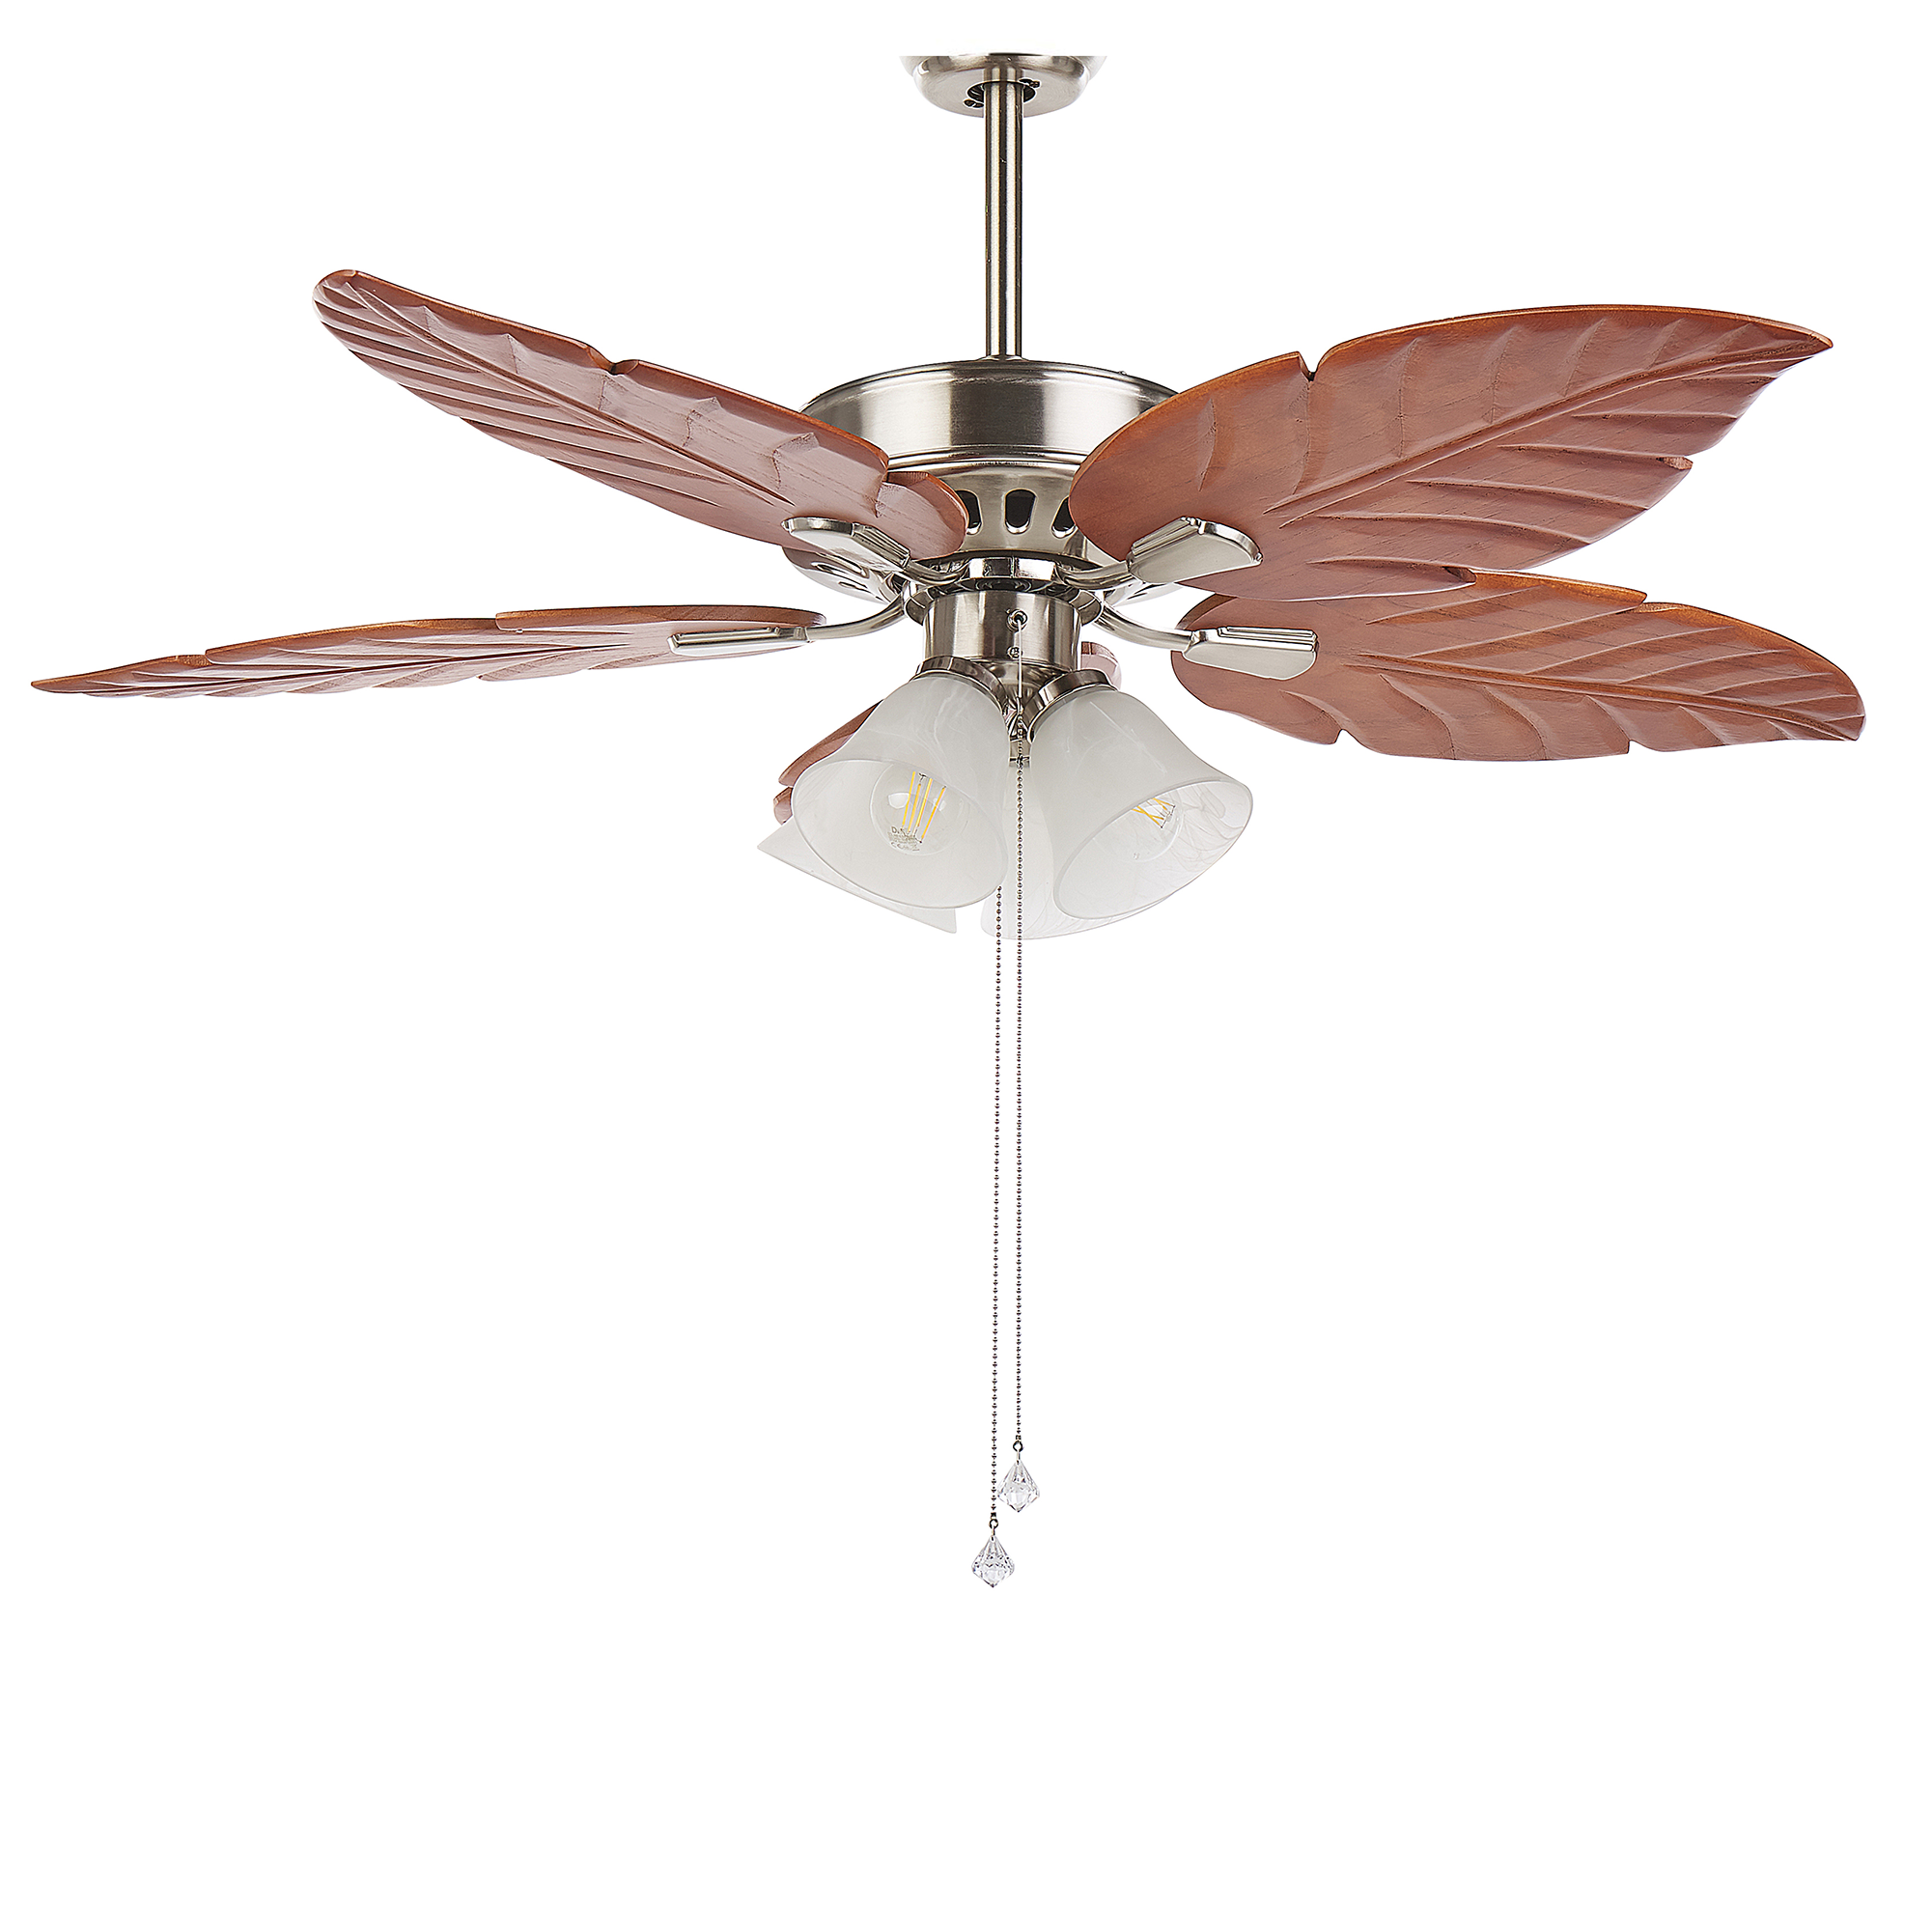 Beliani Ceiling Fan with Light Silver Metal Wooden Leaf-Shaped Reversible Blades with Pull Chain Speed Control Retro Design